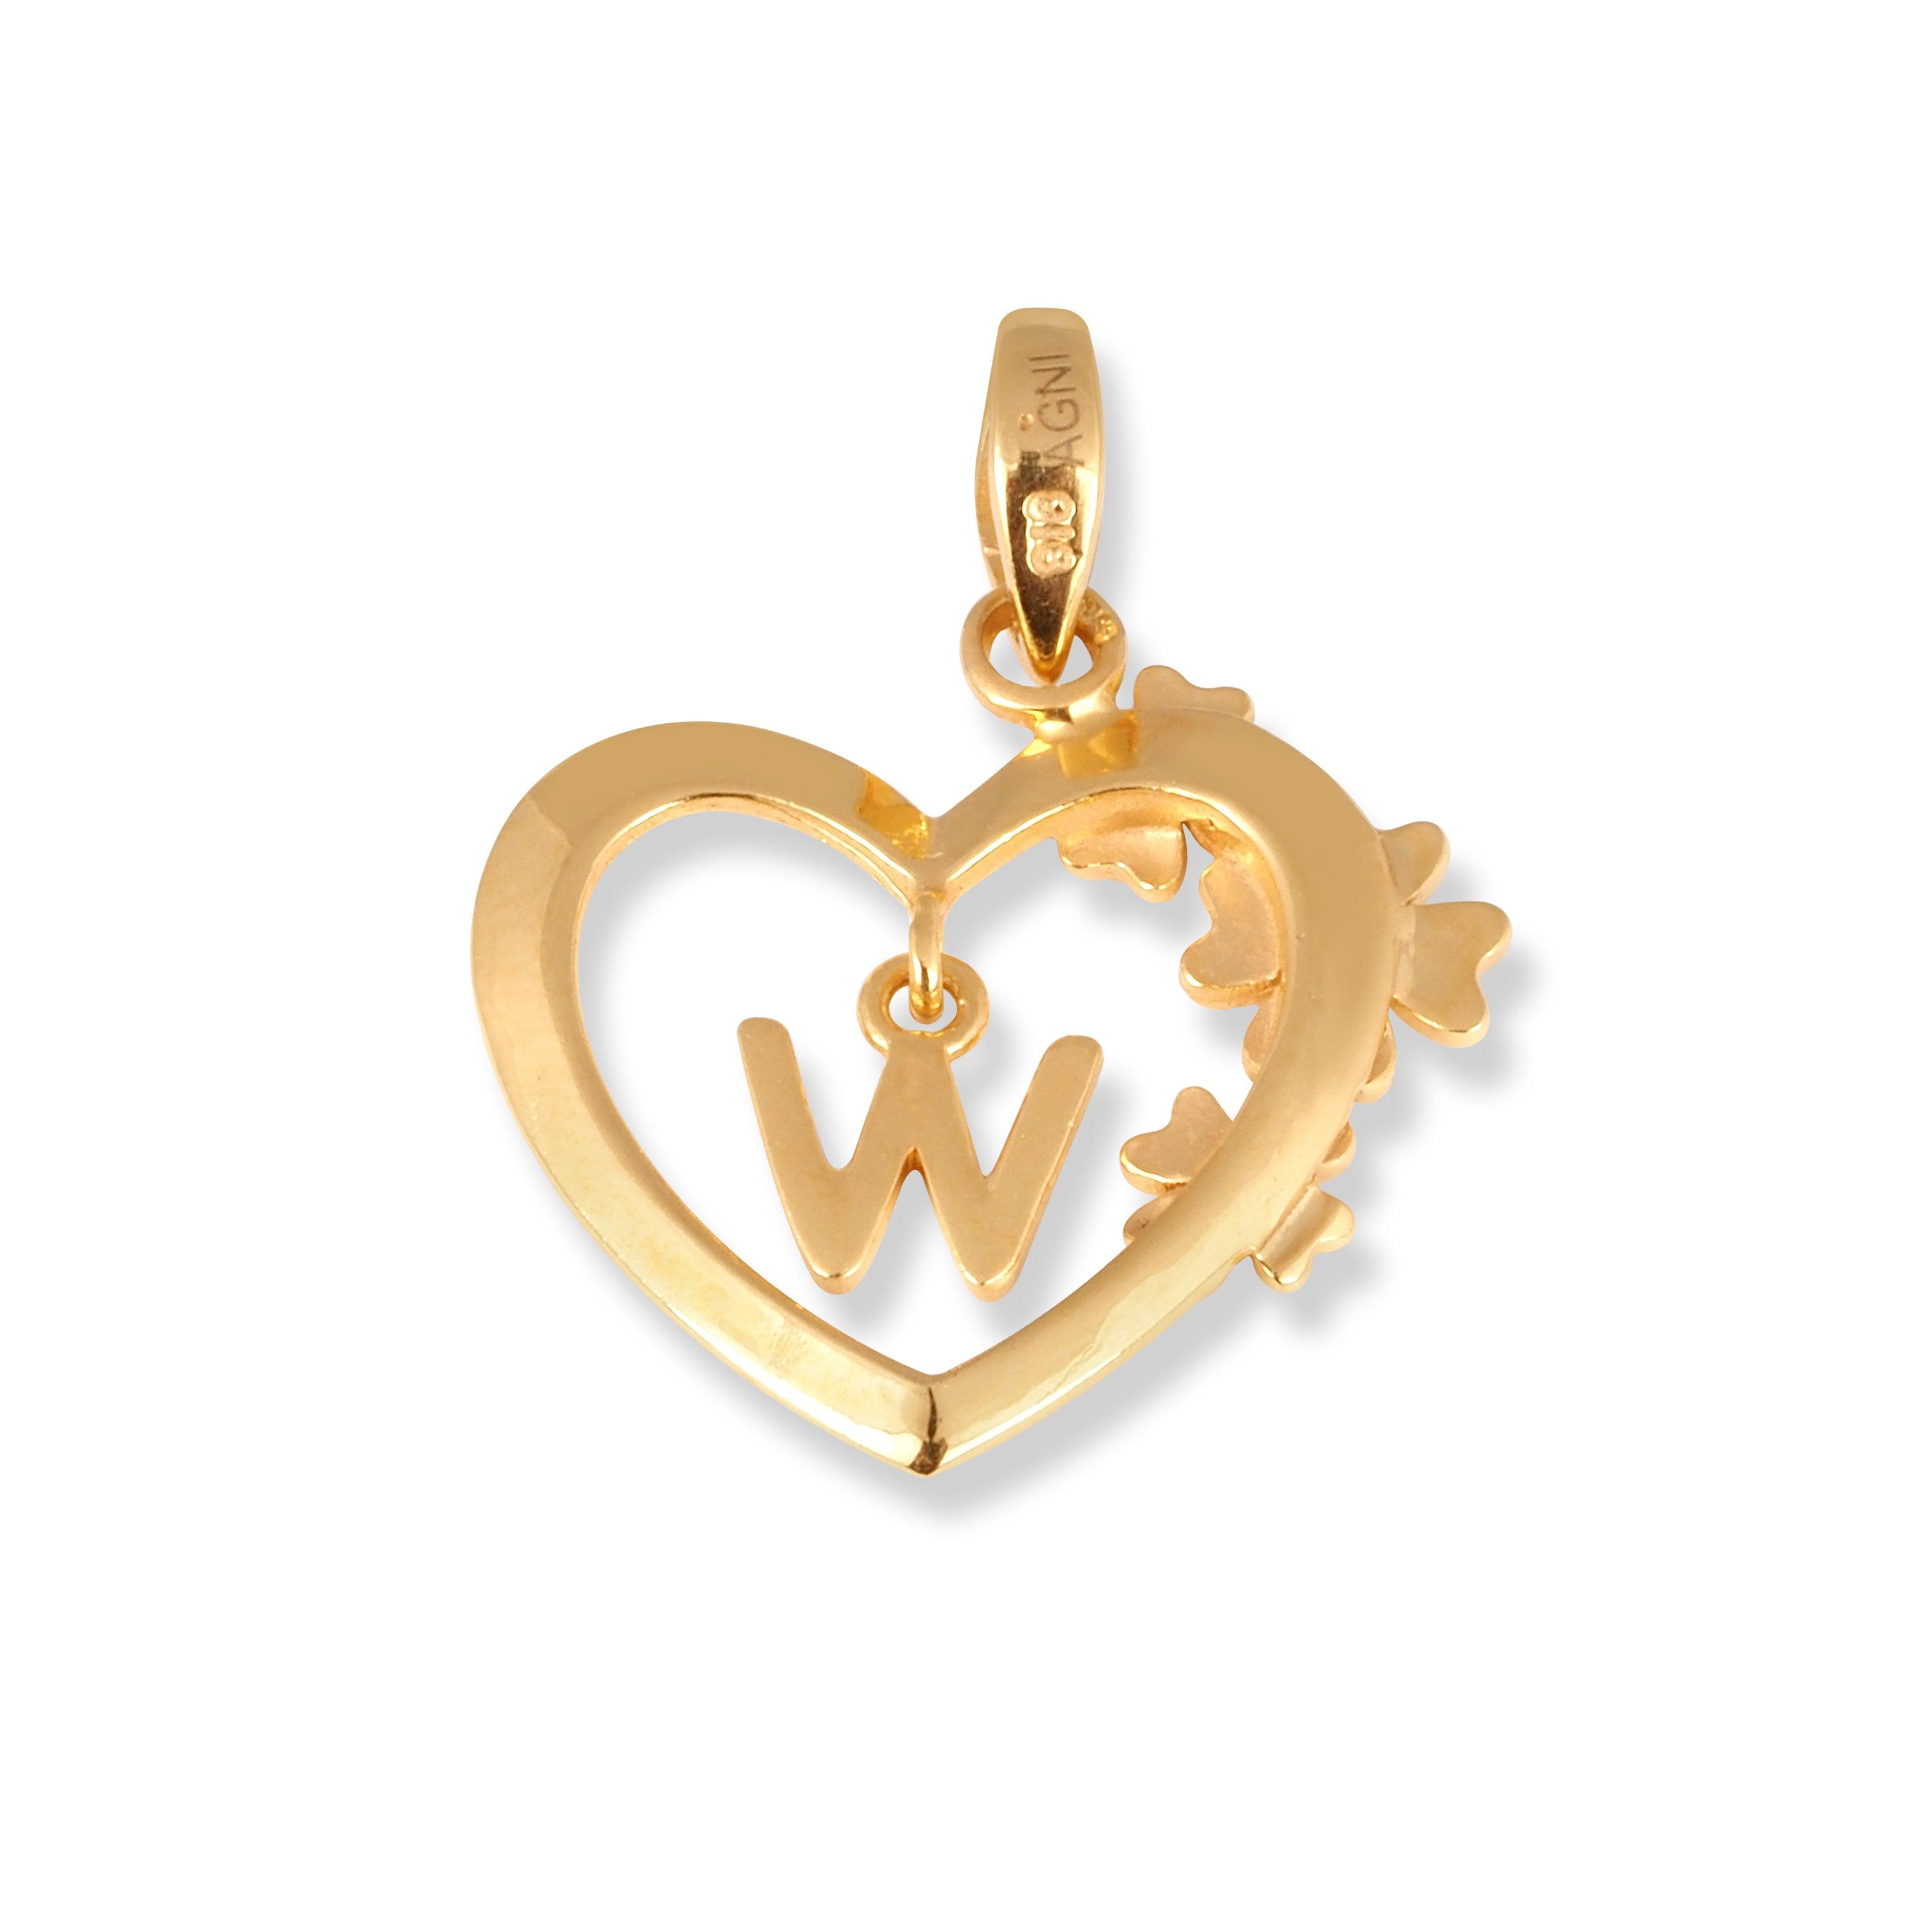 'W' 22ct Gold Heart Shape Initial Pendant with Flower Design P-7035-W - Minar Jewellers